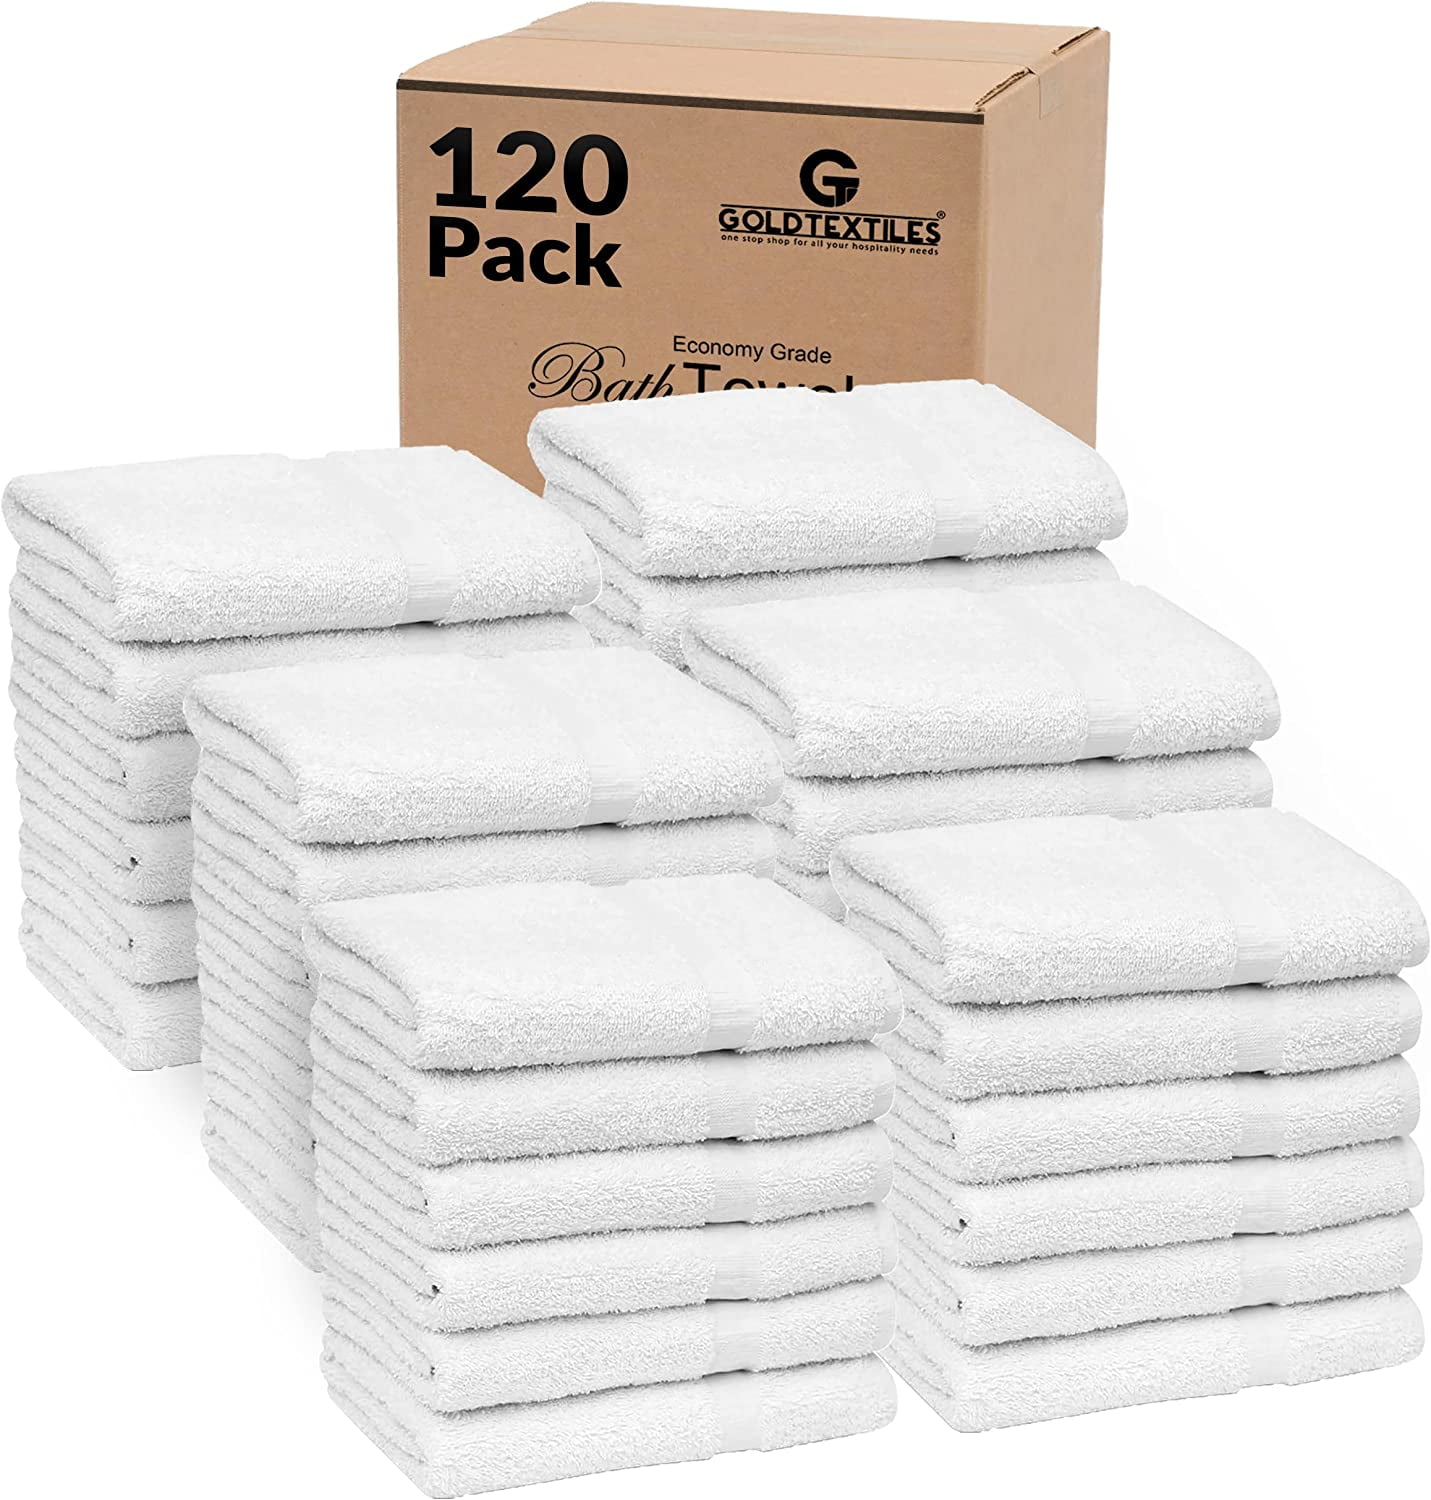 GOLD TEXTILES Bulk Bath Towels White 36 Pack (22x44 Inches) Economy Light  Weight Easycare